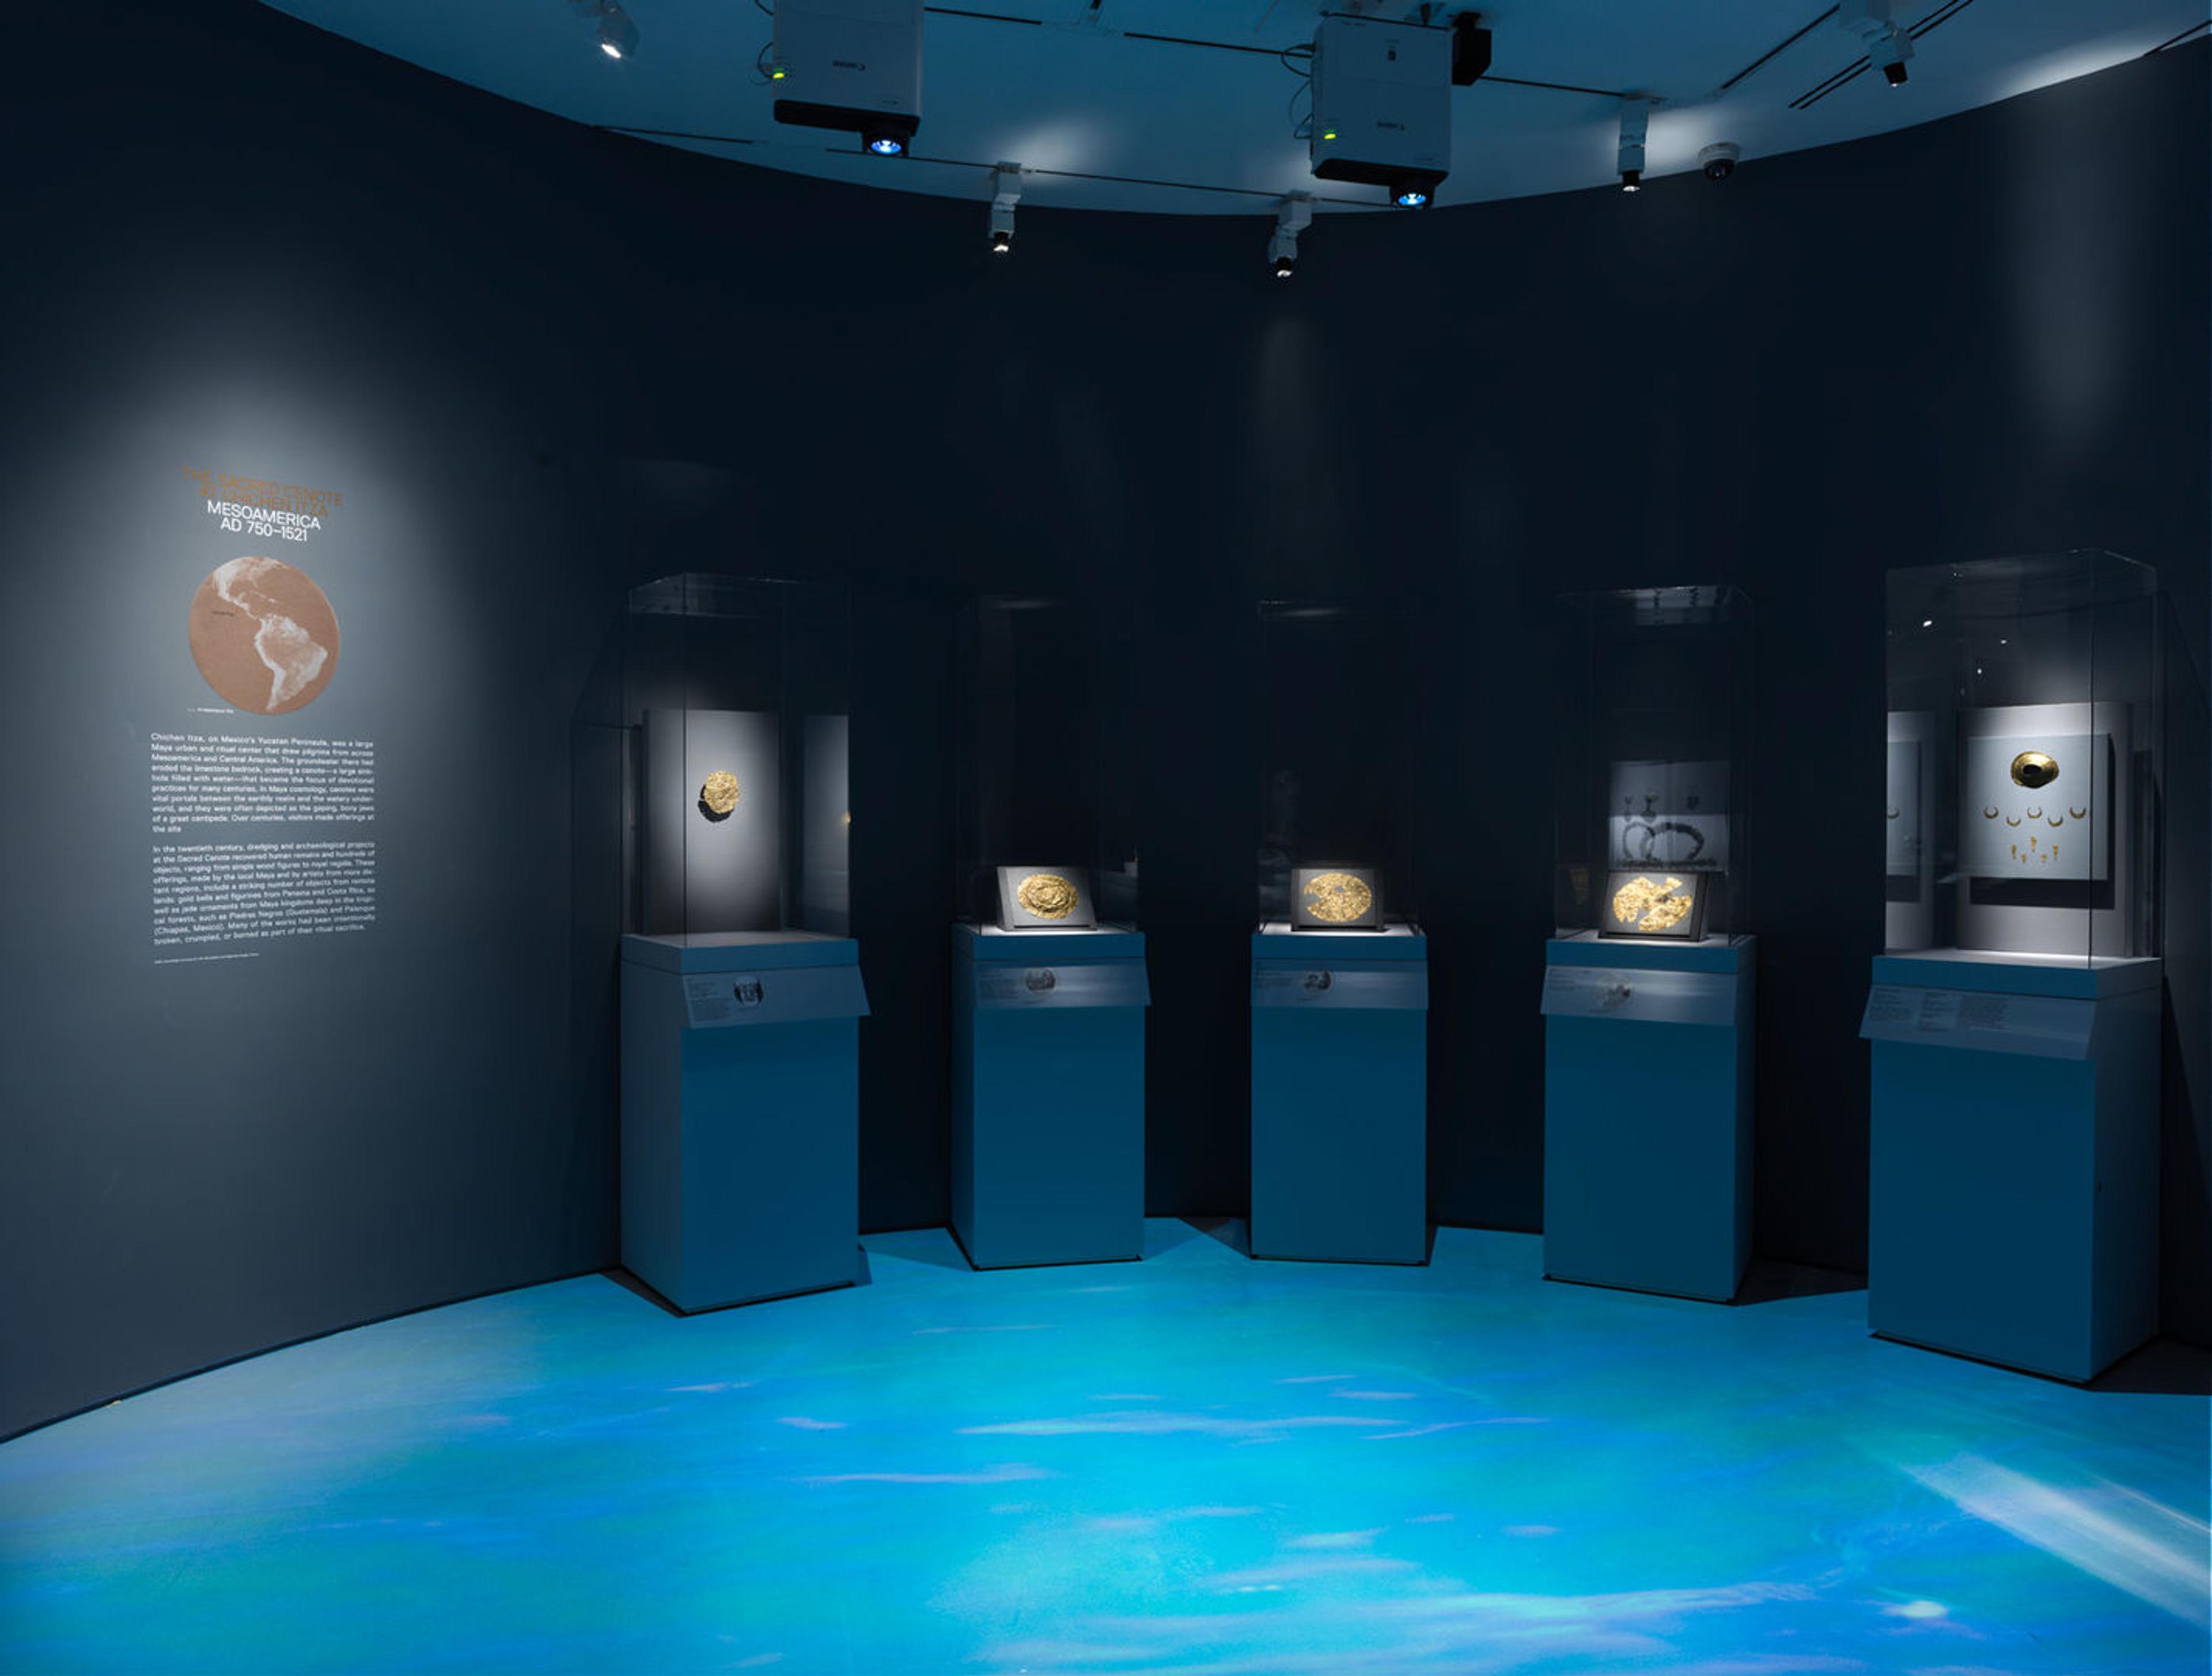 Installation view of an exhibition of goldwork from the ancient Americas